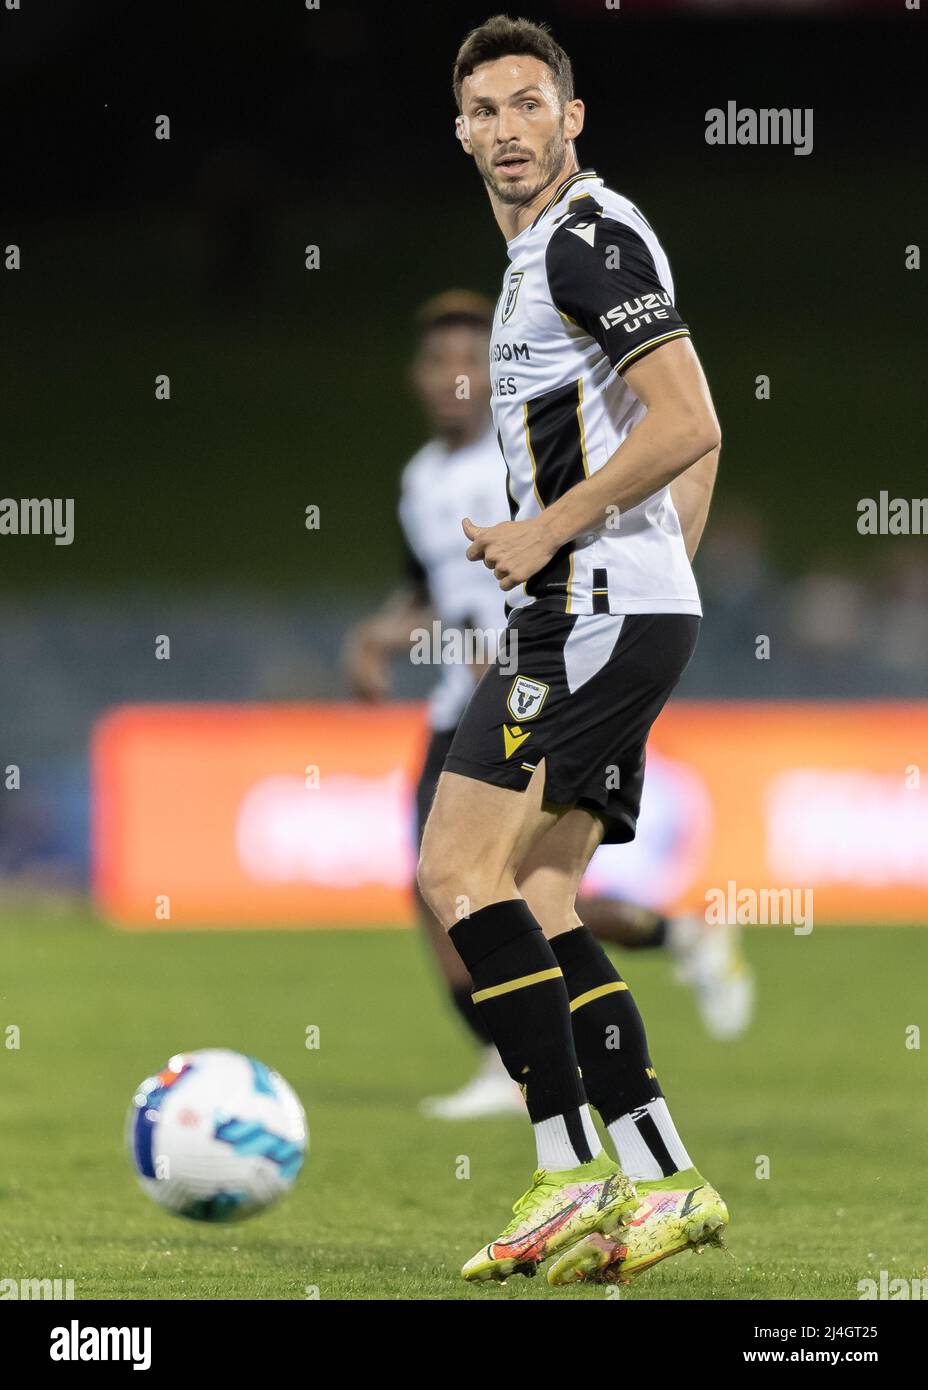 Sydney, Australia. 15th Apr, 2022. Tomi Juric of the Bulls in action during the A-League Mens match between Macarthur FC and Brisbane Roar at Campbelltown Sports Stadium, on April 15, 2022, in Sydney, Australia. Credit: Izhar Ahmed Khan/Alamy Live News/Alamy Live News Stock Photo